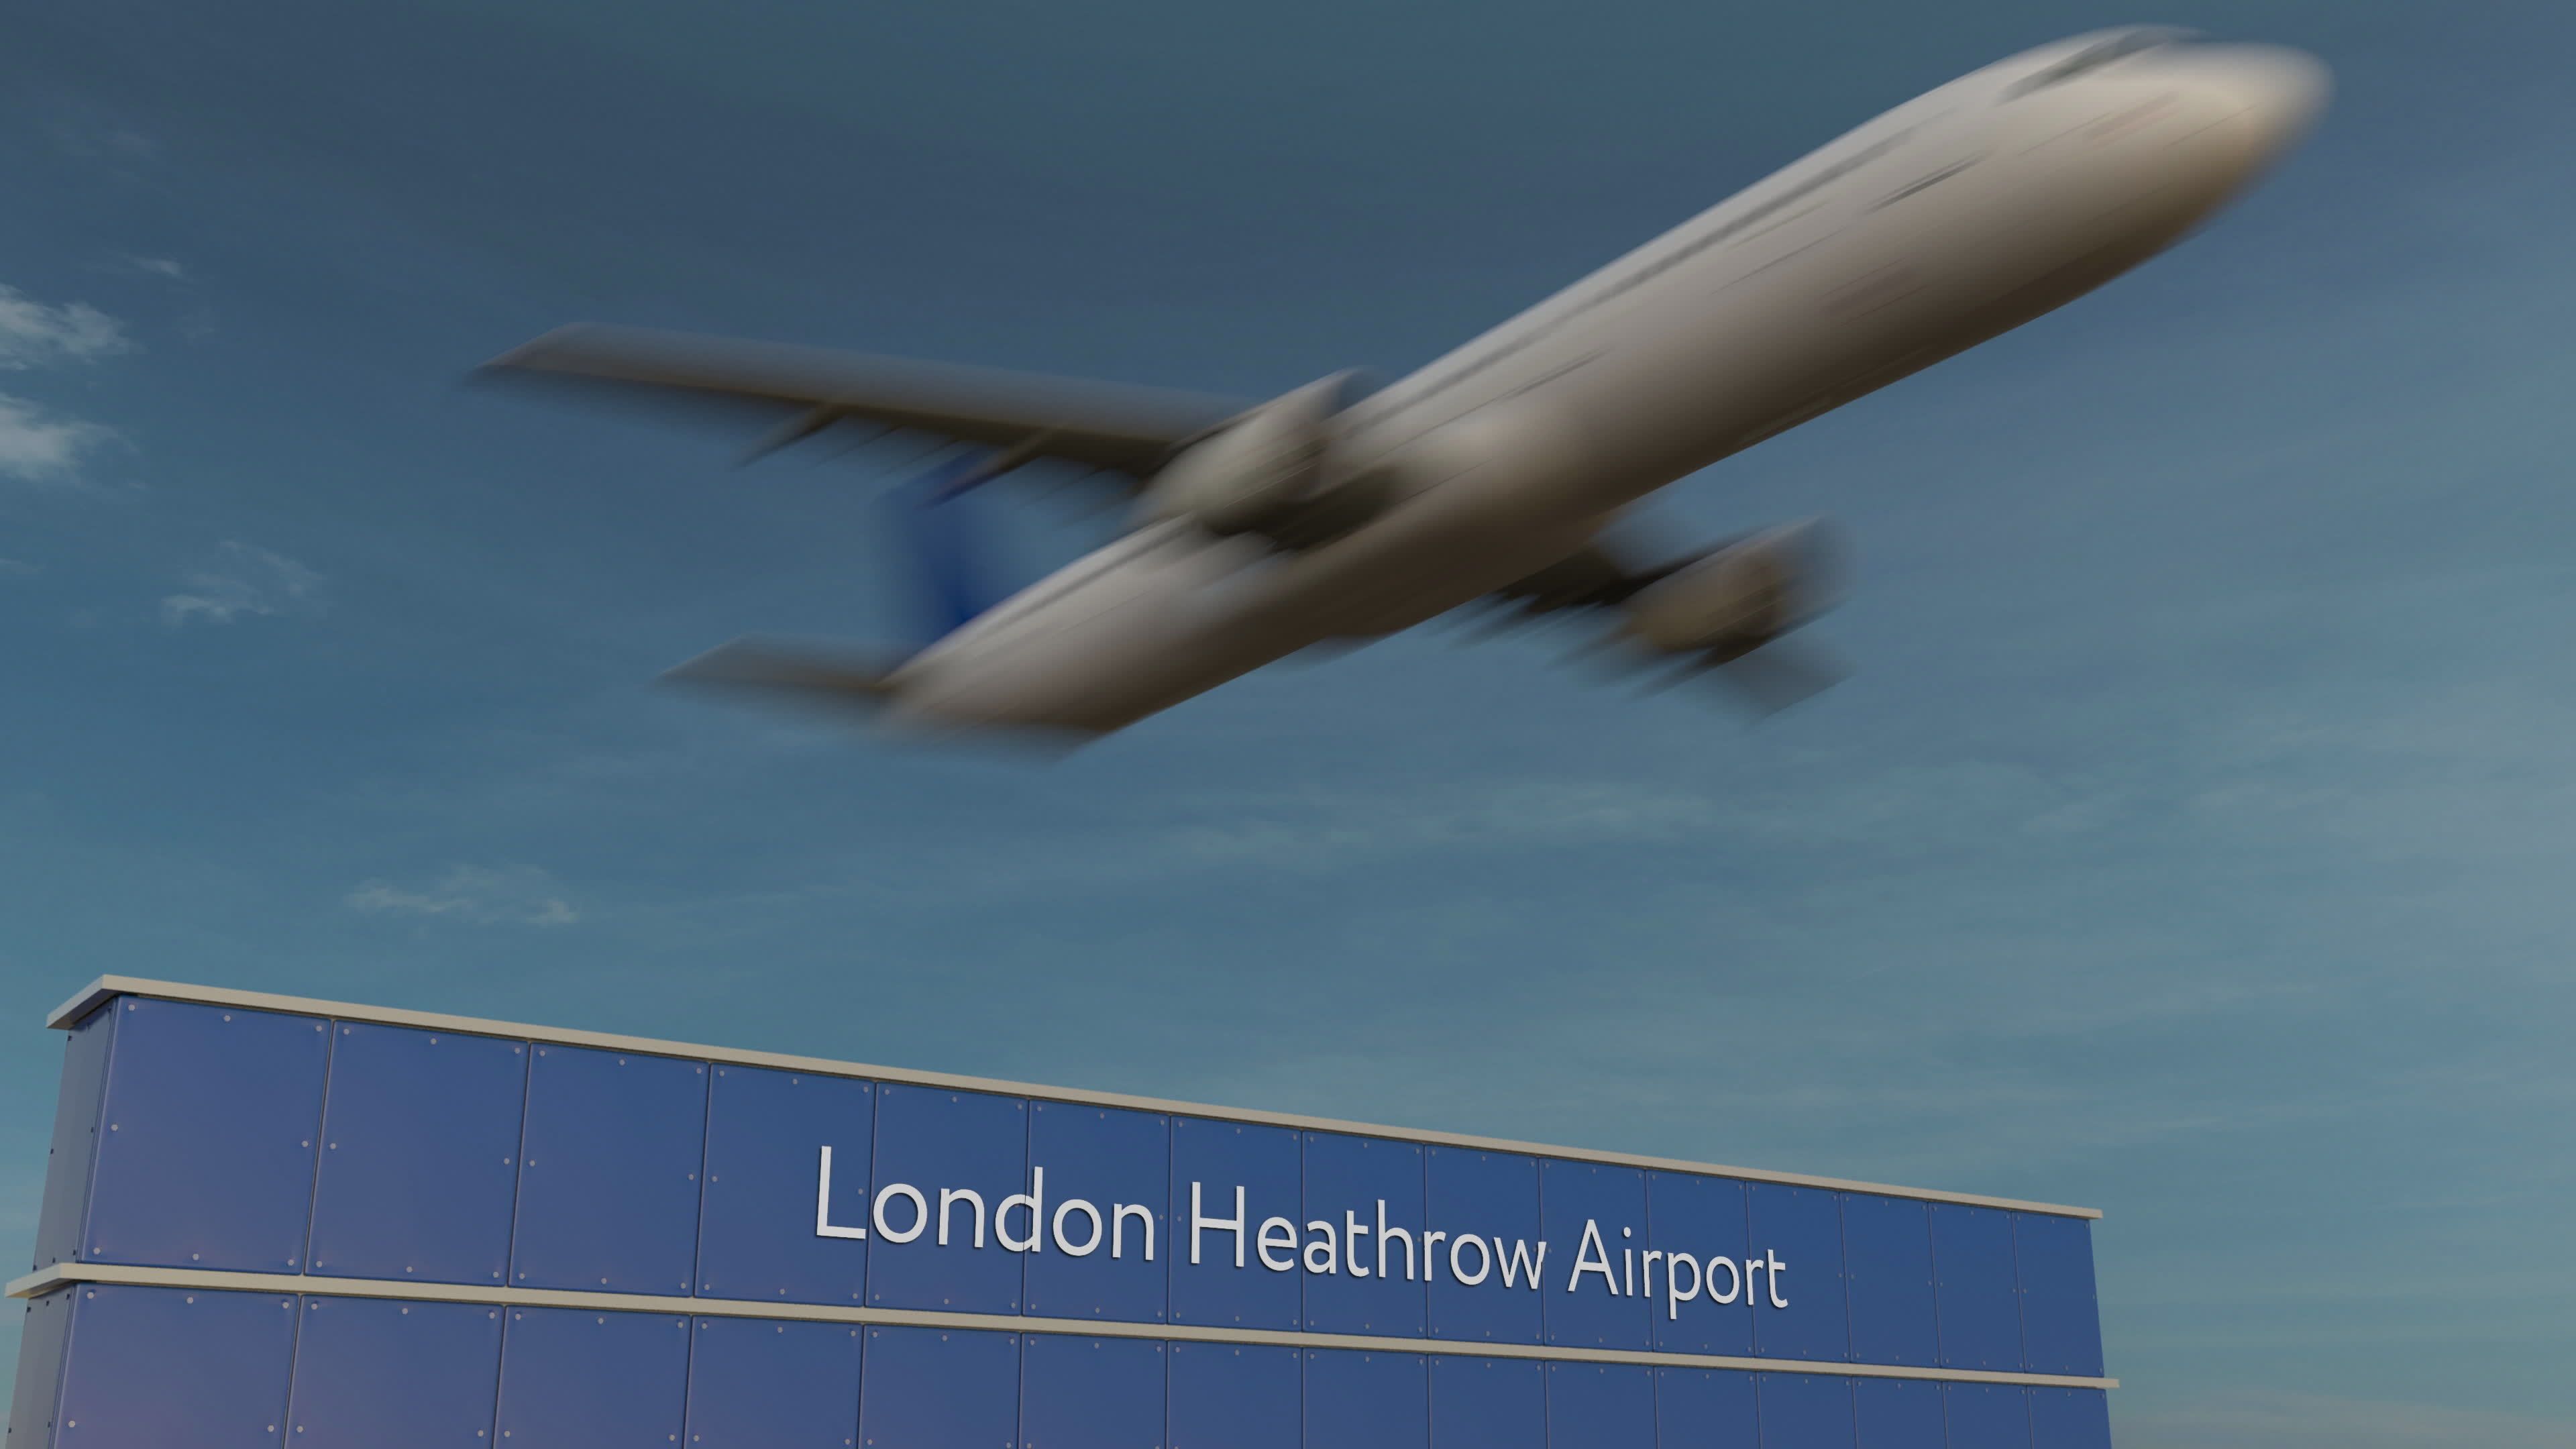 Heathrow airport sign and plane